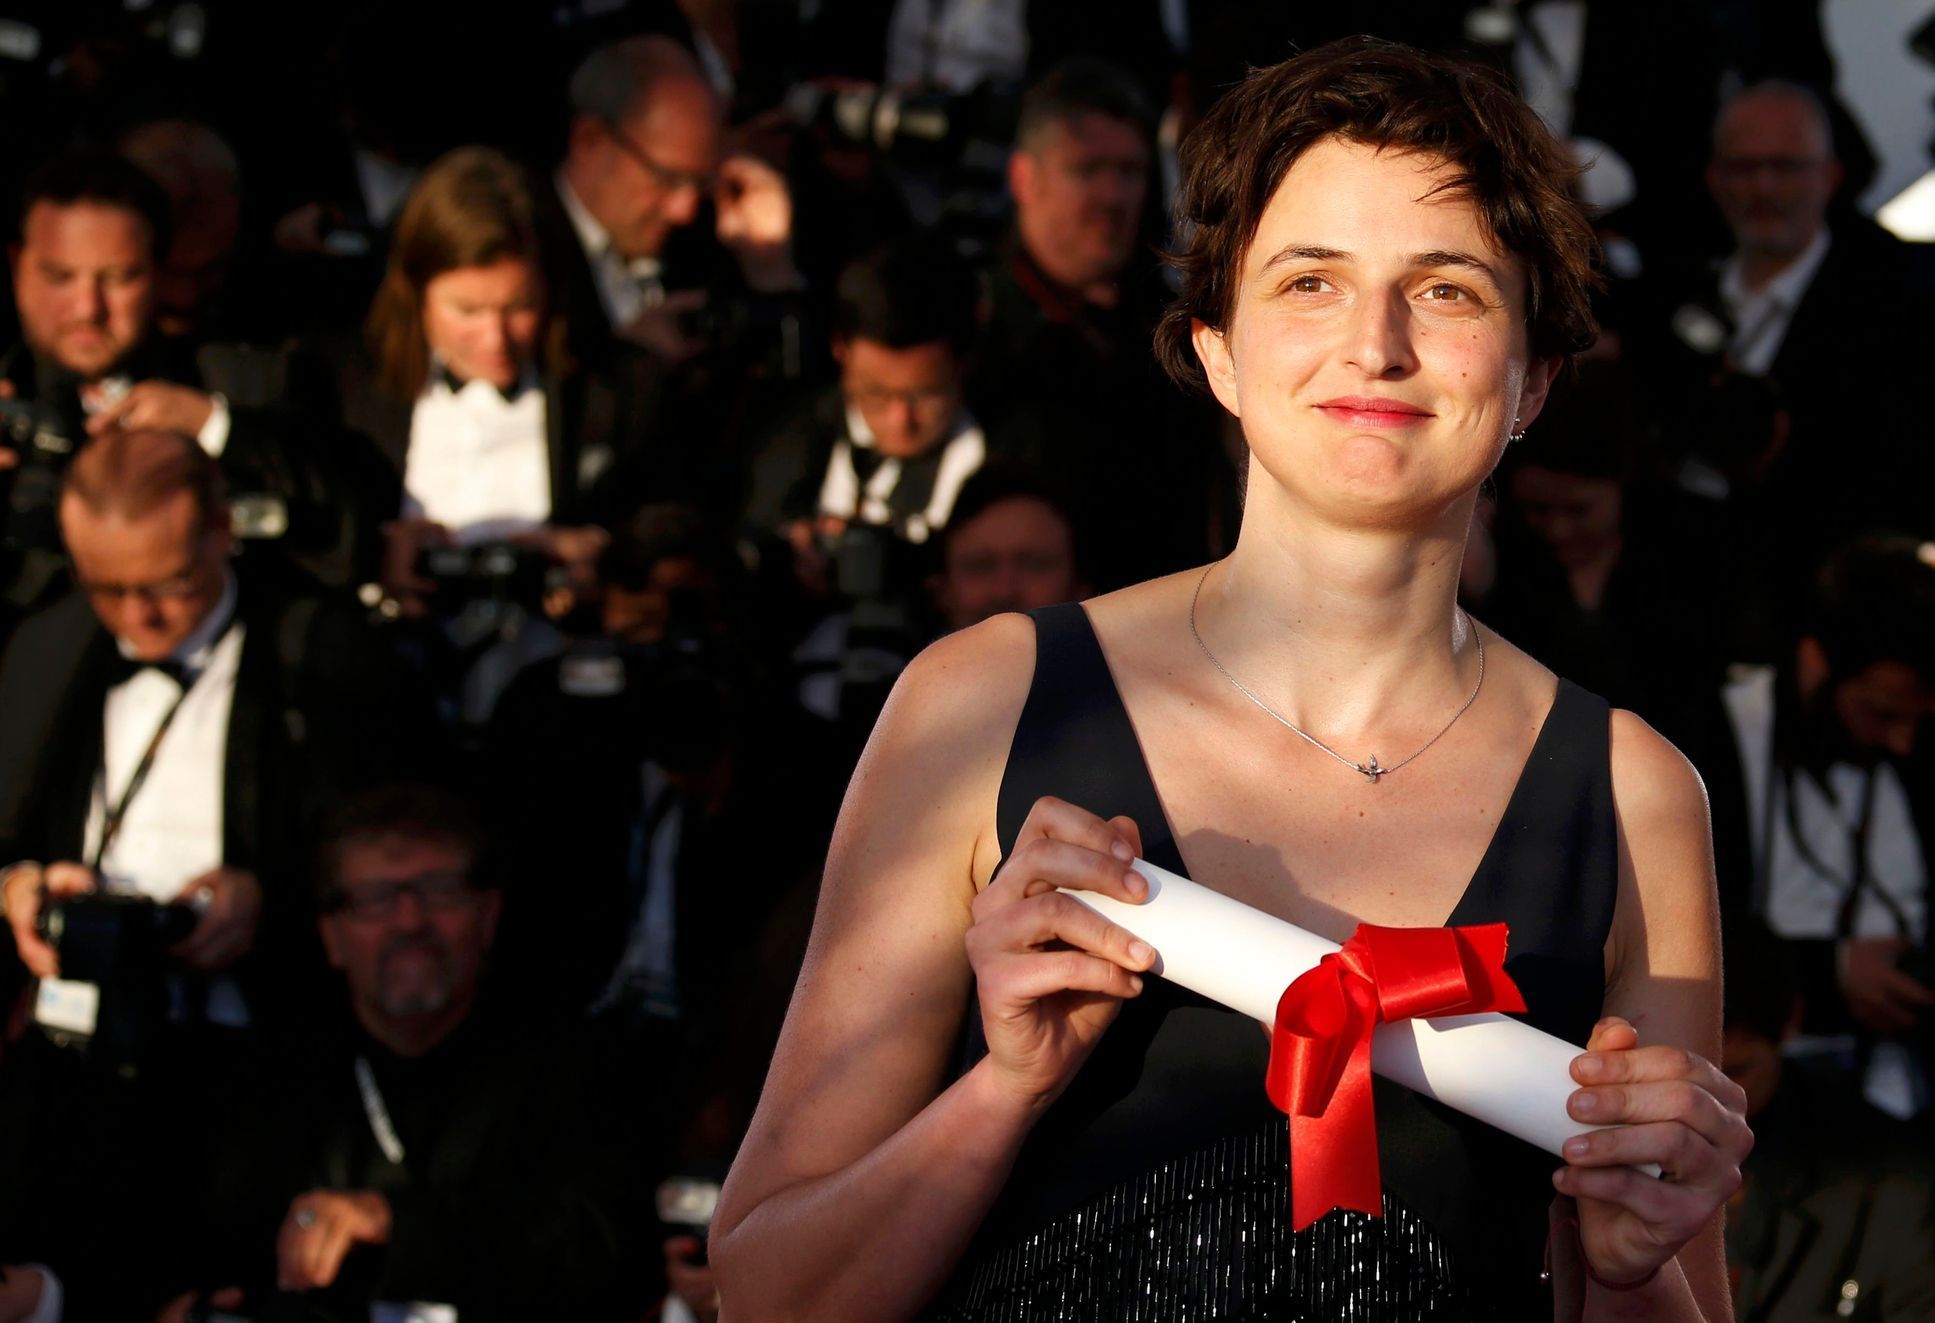 Director Alice Rohrwacher, Grand Prix award winner for her film &quot;Le meraviglie&quot;, poses during a photocall at the closing ceremony of the 67th Cannes Film Festival in Cannes